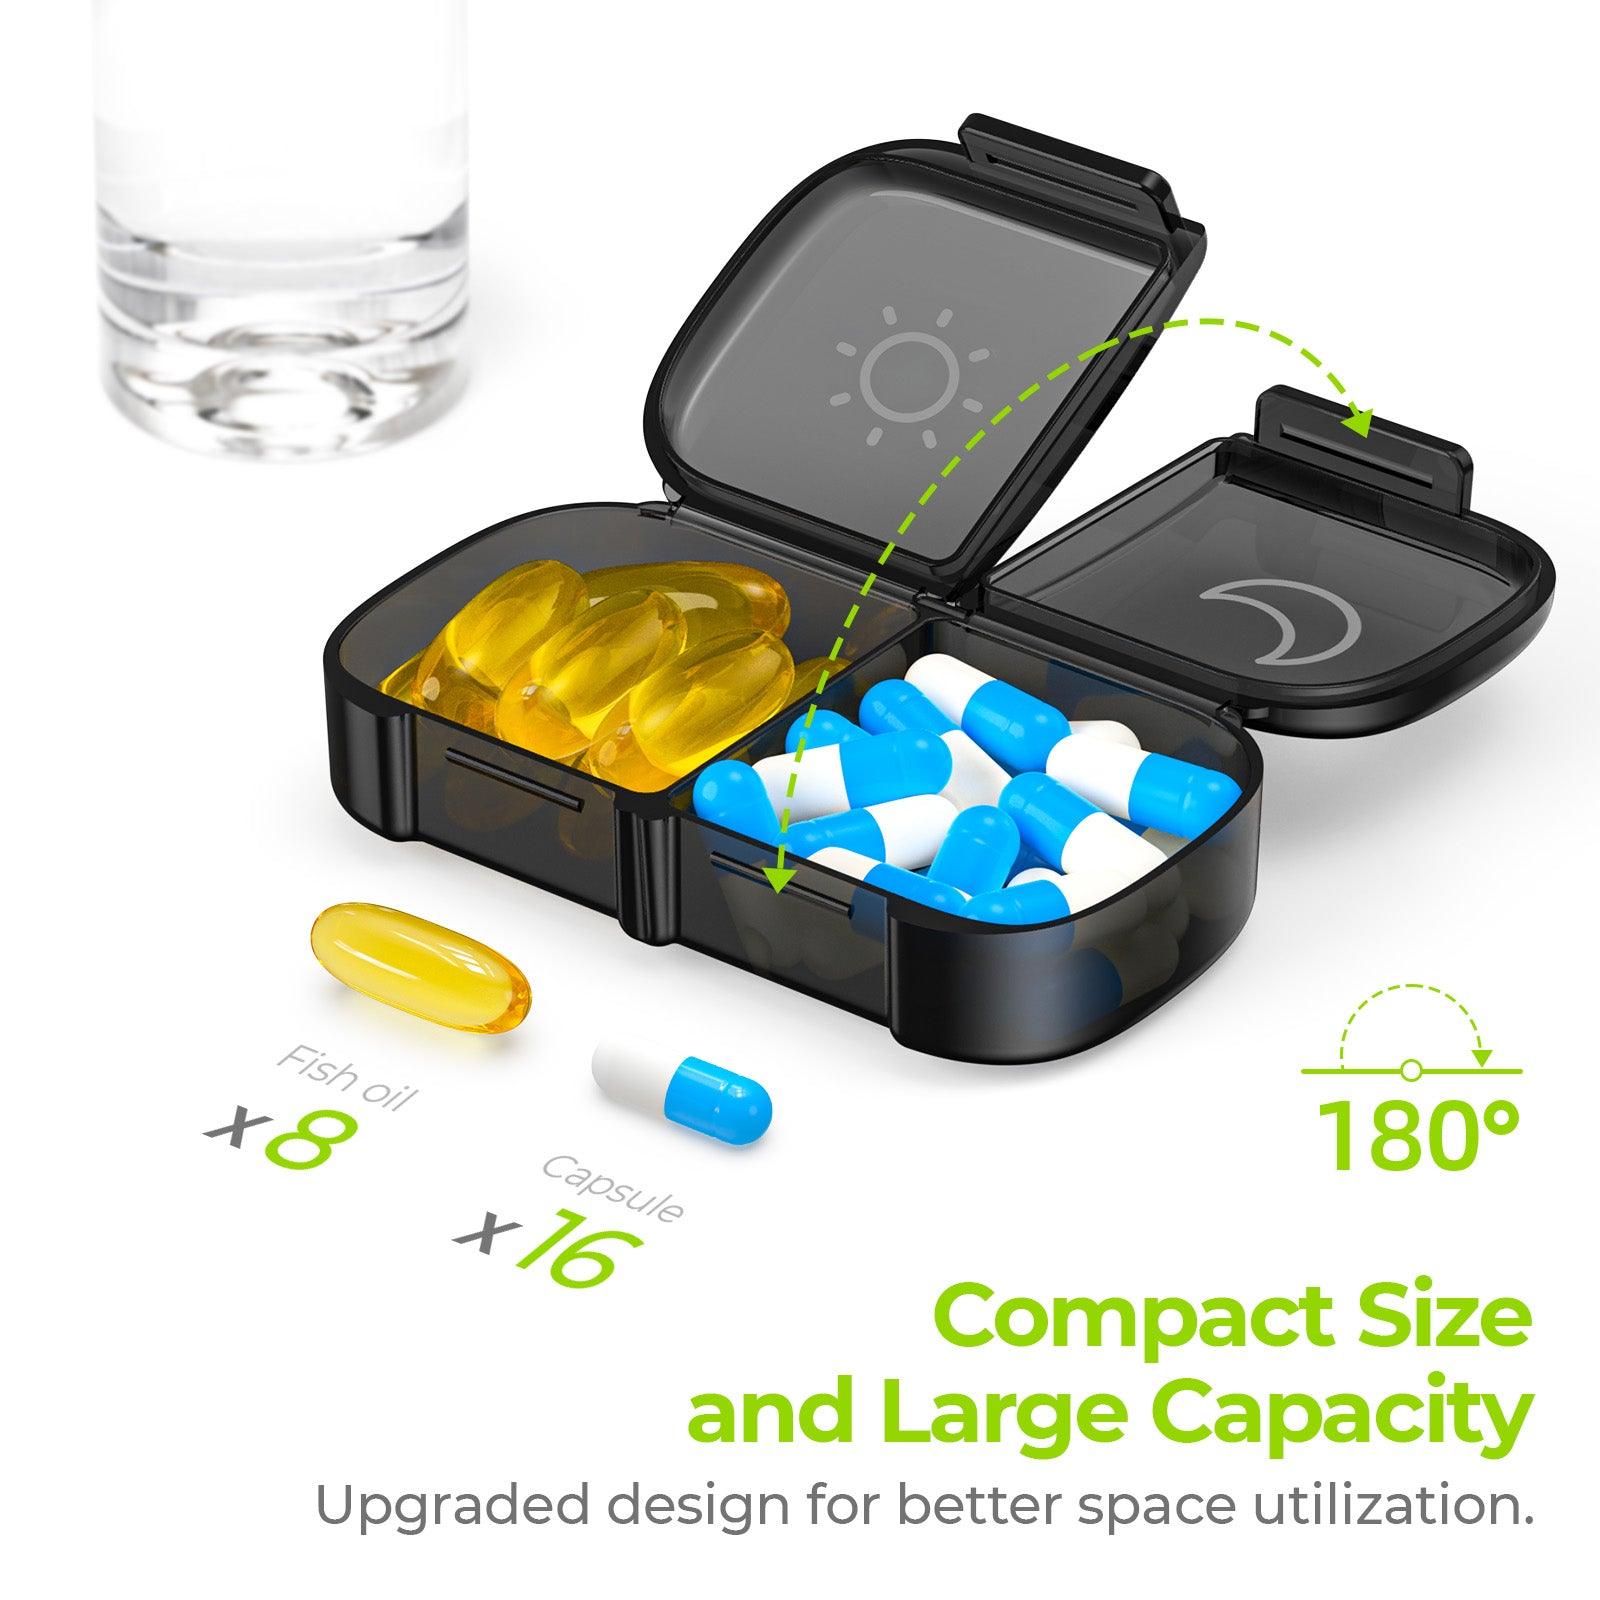 4 Pack Pill Case Portable Small Weekly Travel Pill Organizer Portable Pocket Pill Box Dispenser for Purse Vitamin Fish Oil Compartments Container